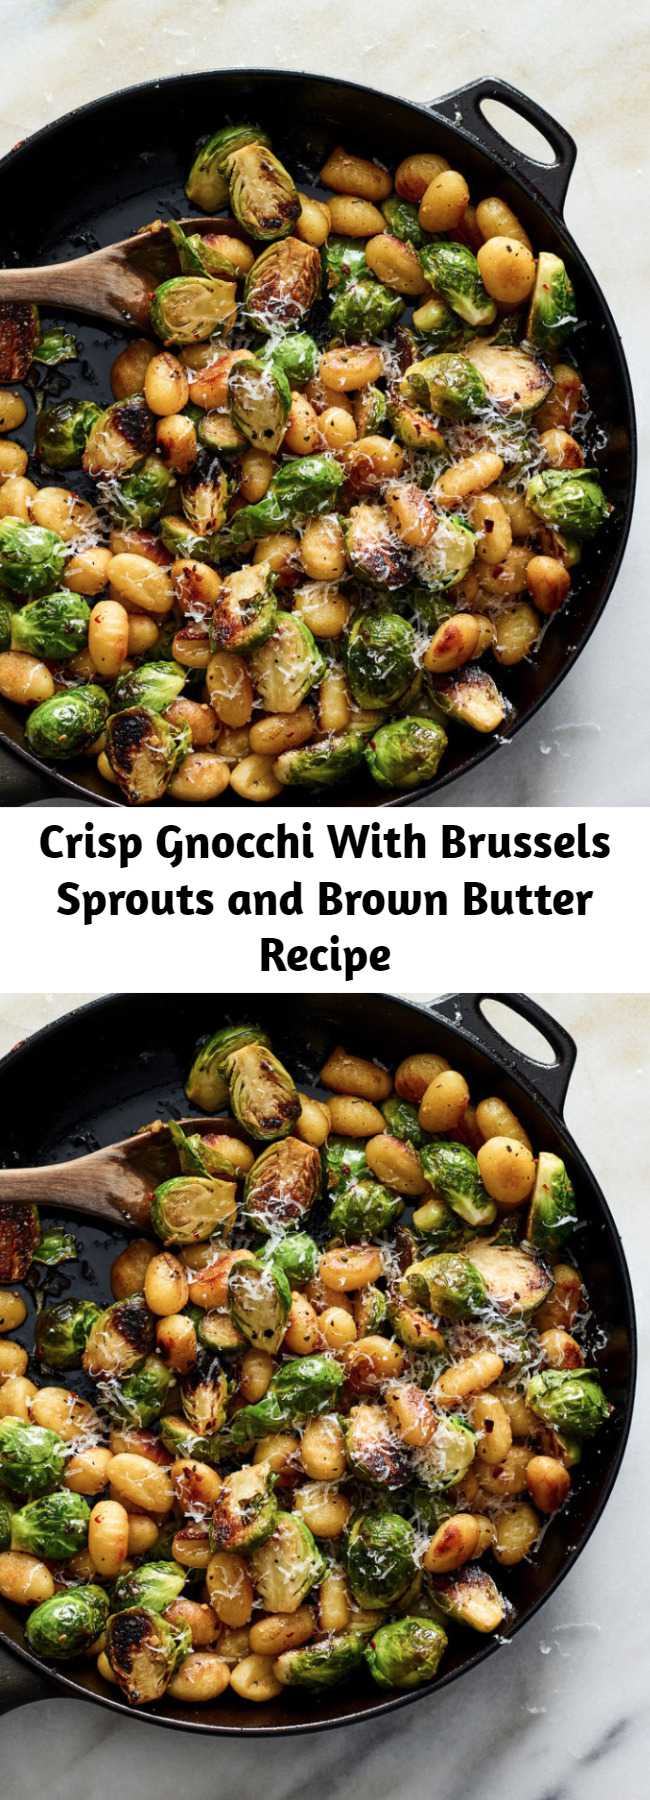 Crisp Gnocchi With Brussels Sprouts and Brown Butter Recipe - For a fantastic meal that can be ready in 20 minutes, toss together seared gnocchi and sautéed brussels sprouts with lemon zest, red-pepper flakes and brown butter. The key to this recipe is how you cook the store-bought gnocchi: No need to boil. Just sear them until they are crisp and golden on the outside, and their insides will stay chewy. The resulting texture is reminiscent of fried dough.